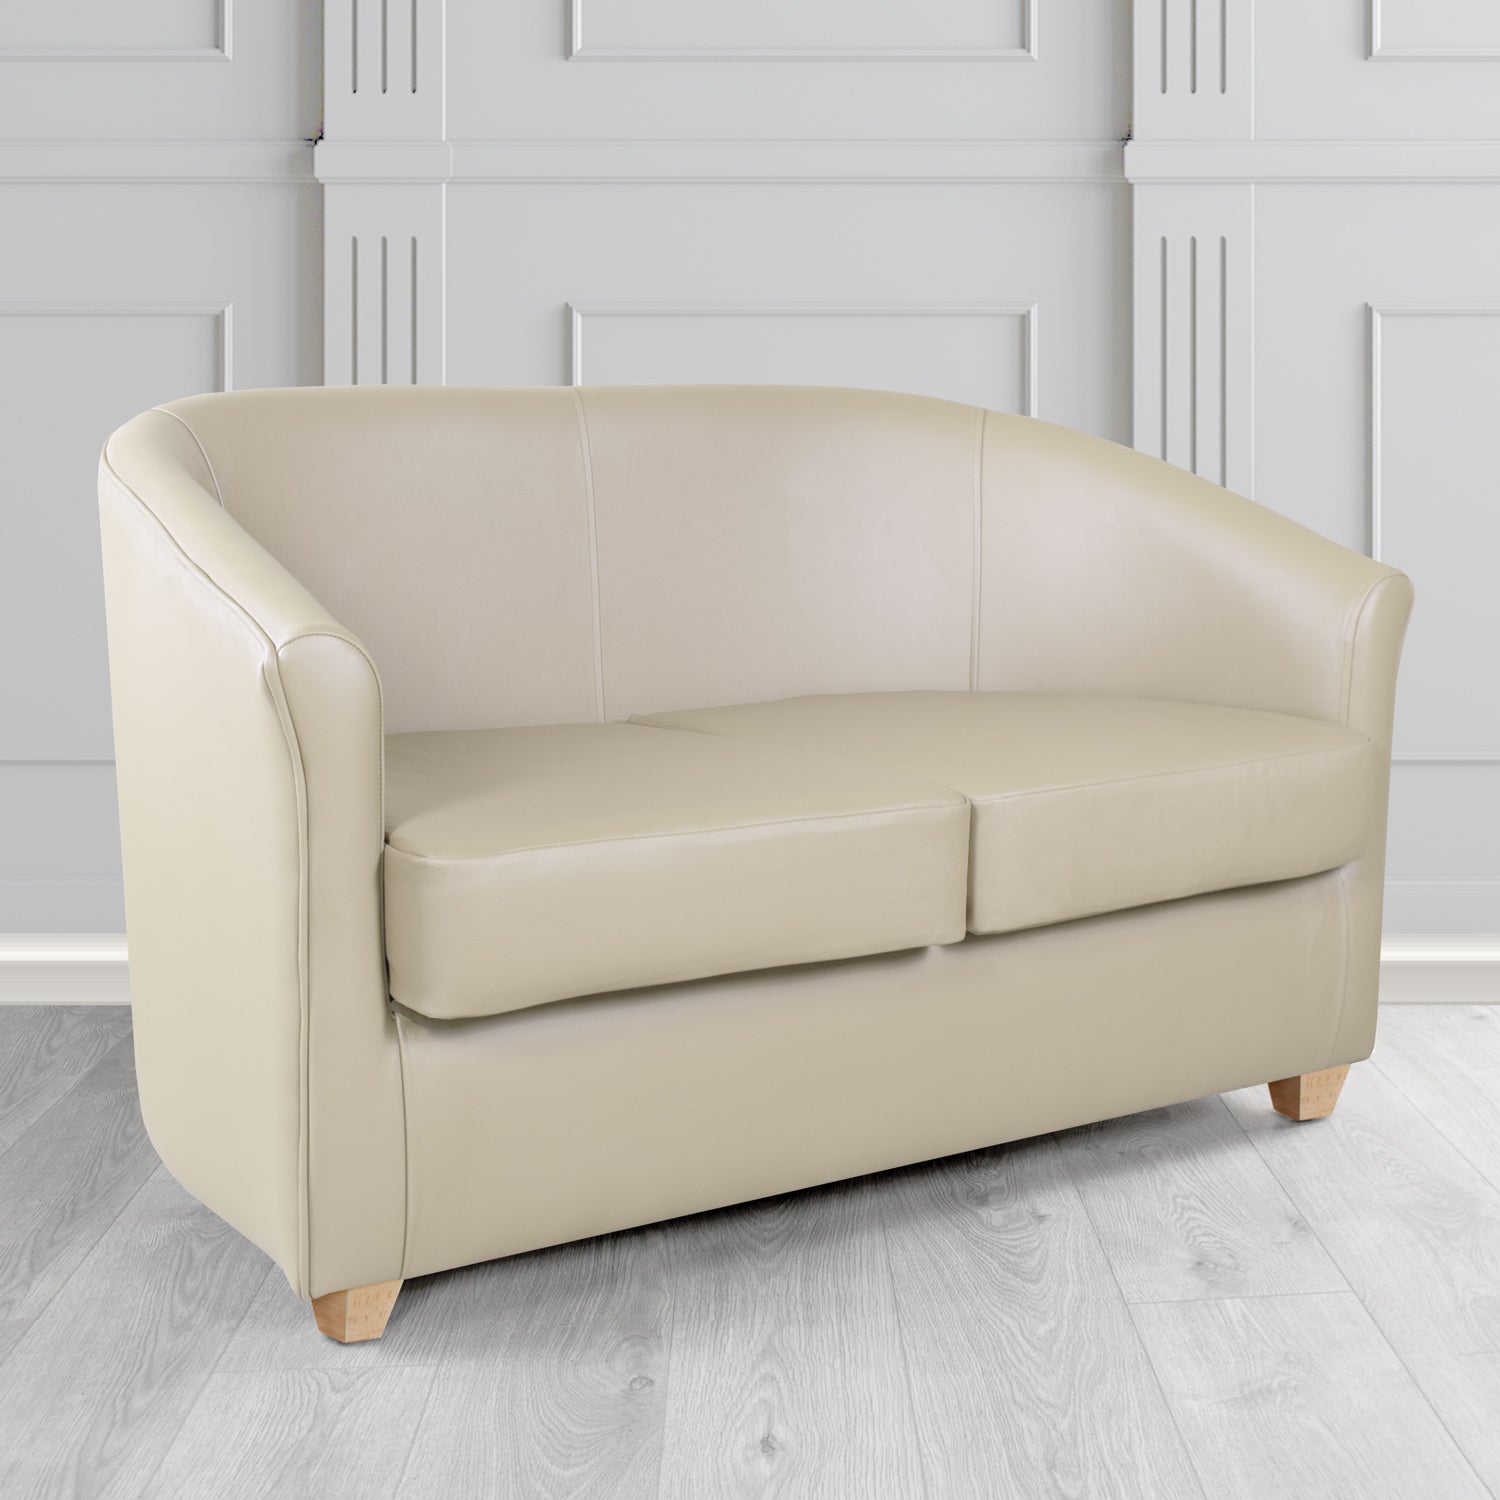 Cannes 2 Seater Tub Sofa in Just Colour Dune Crib 5 Faux Leather - The Tub Chair Shop